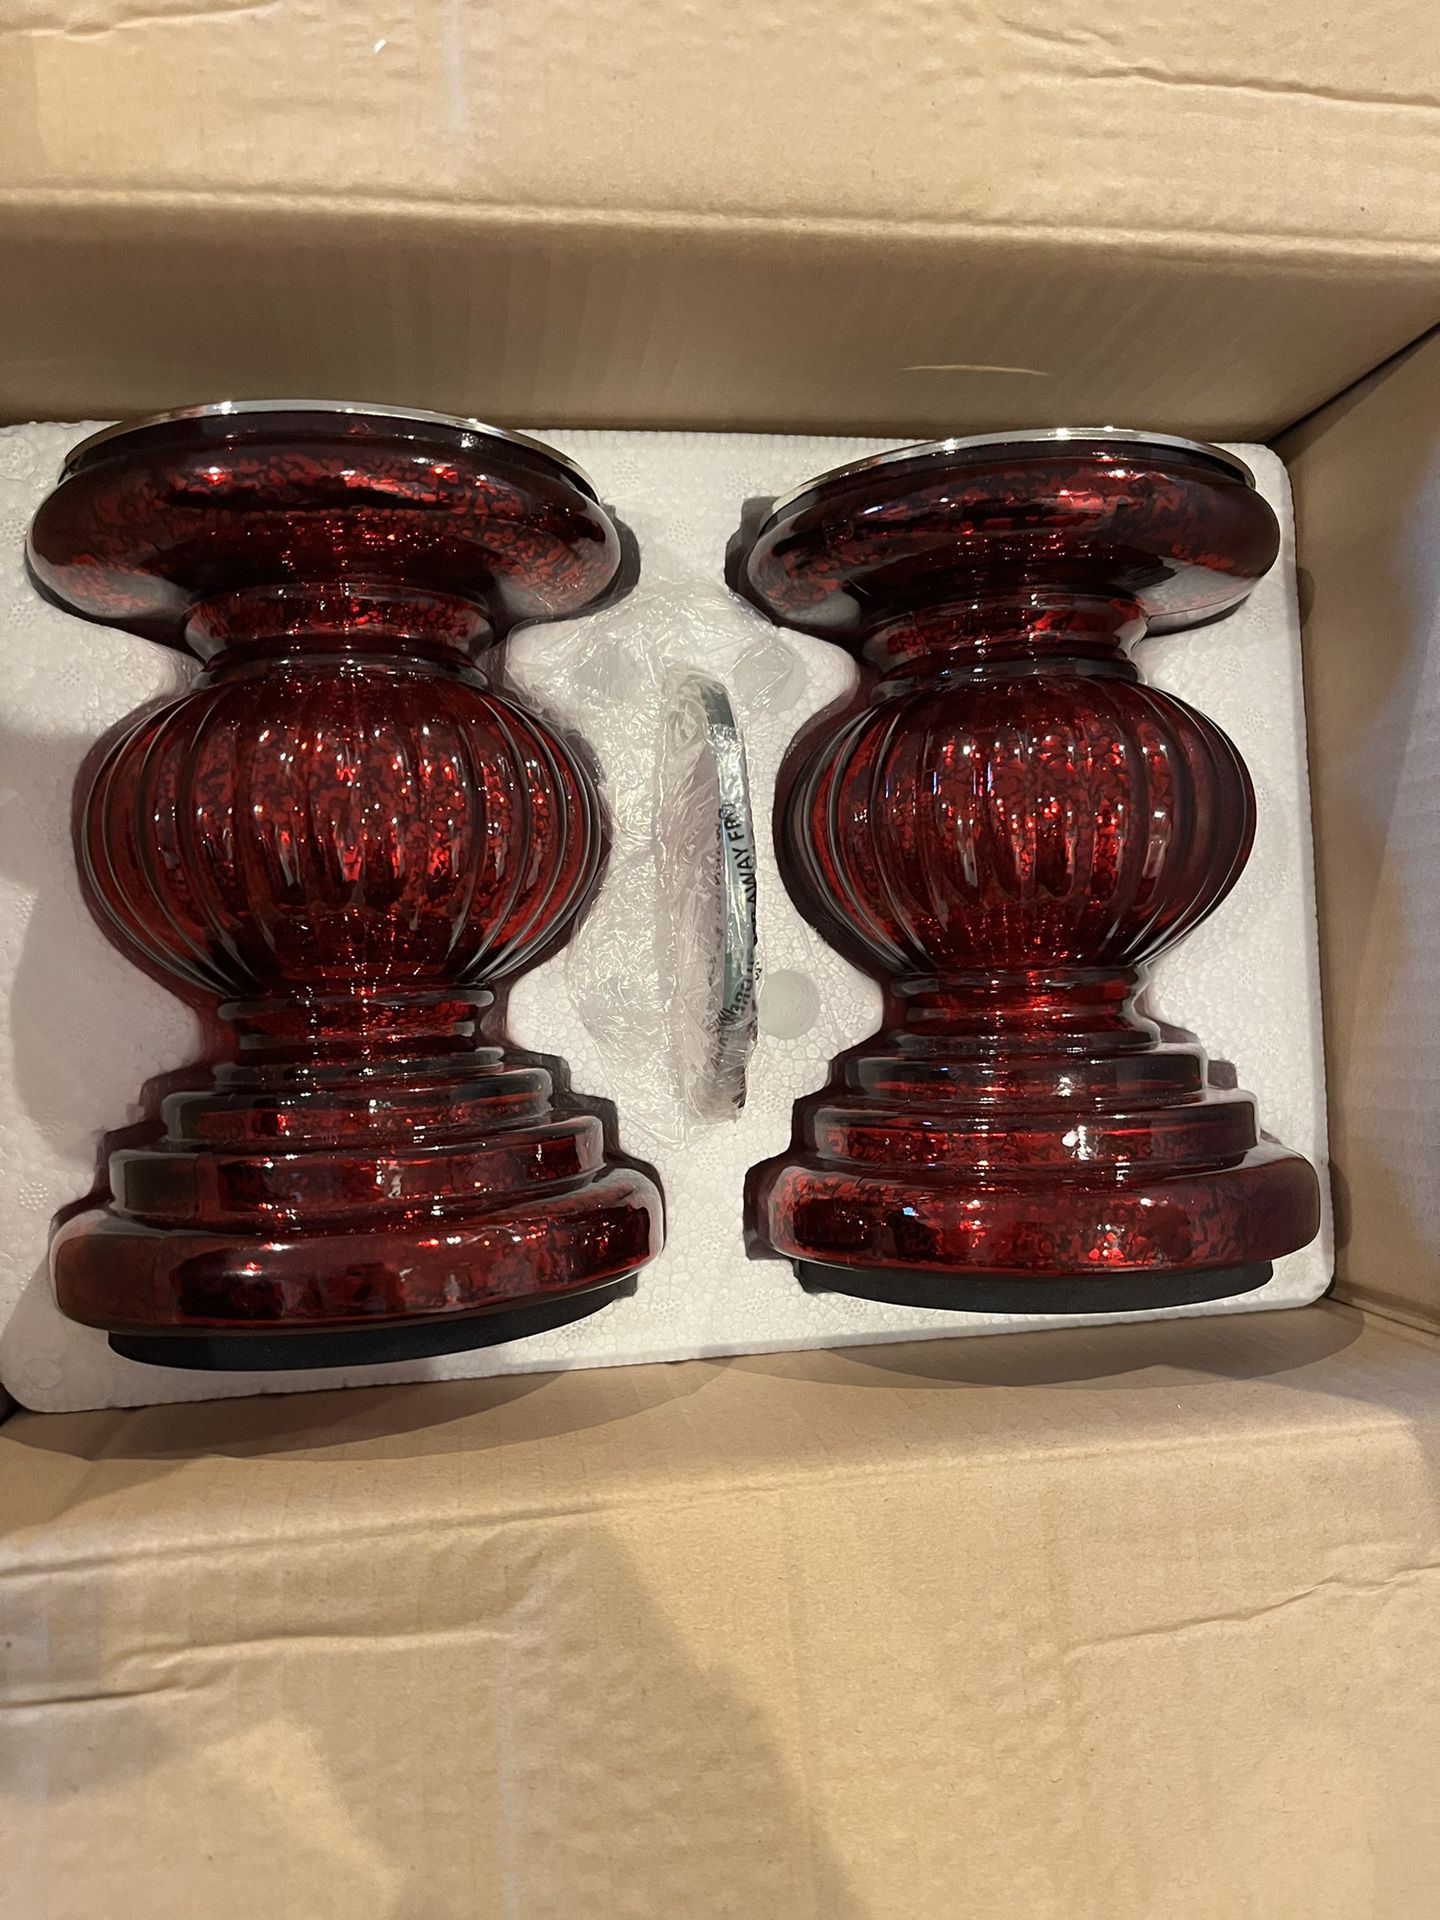  Valerie Parr Hill Mercury Candle Holders Red